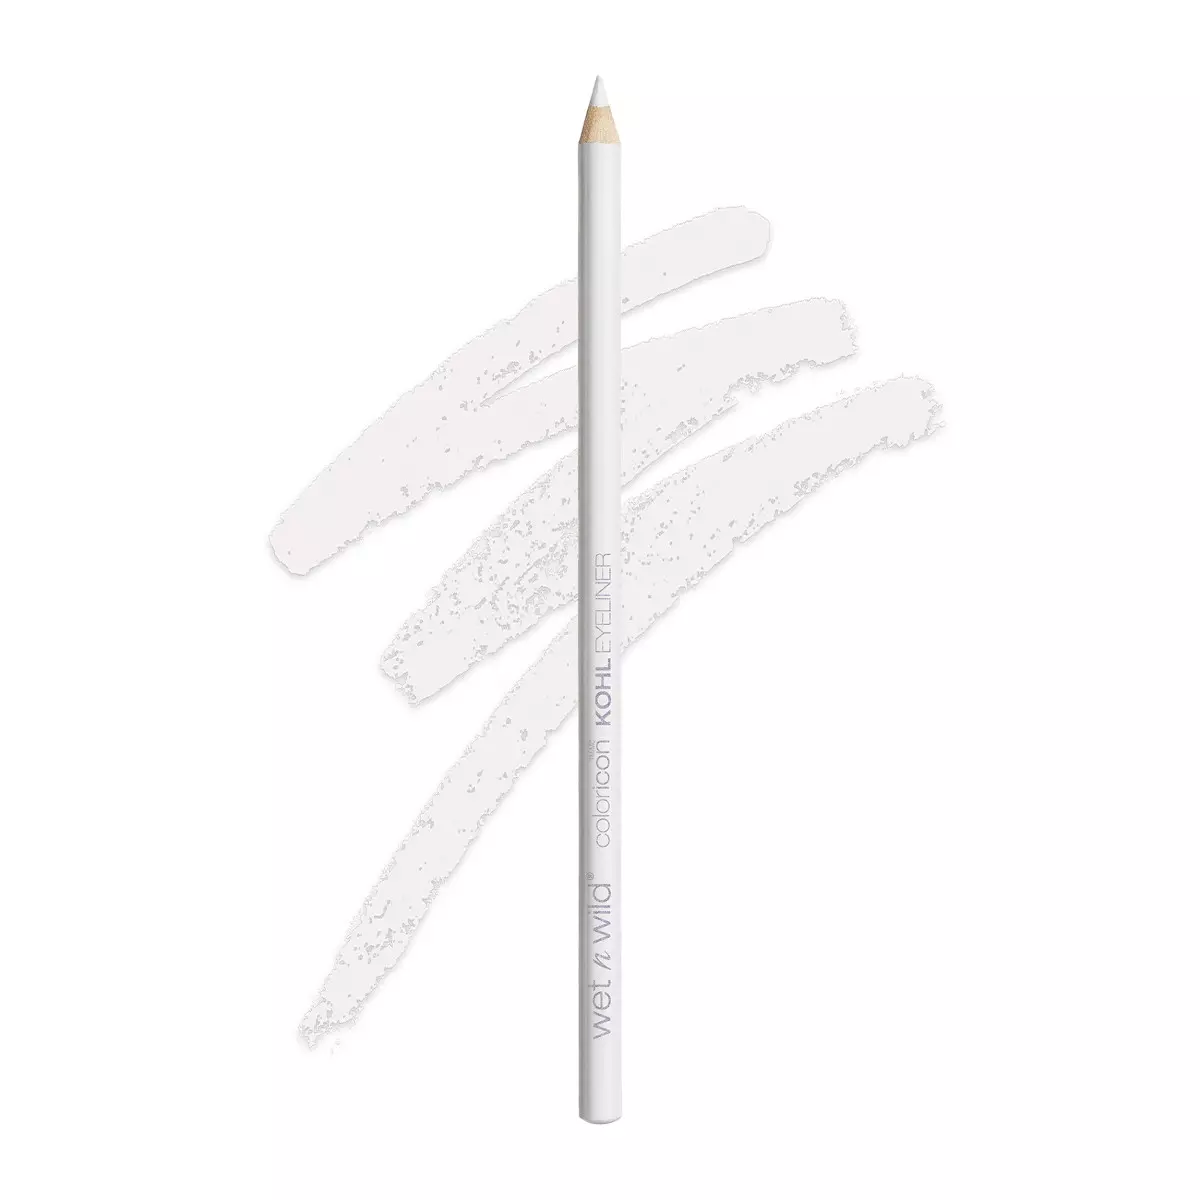 Wet N Wild ColorIcon Kohl Liner Pencil – You’re Always White!